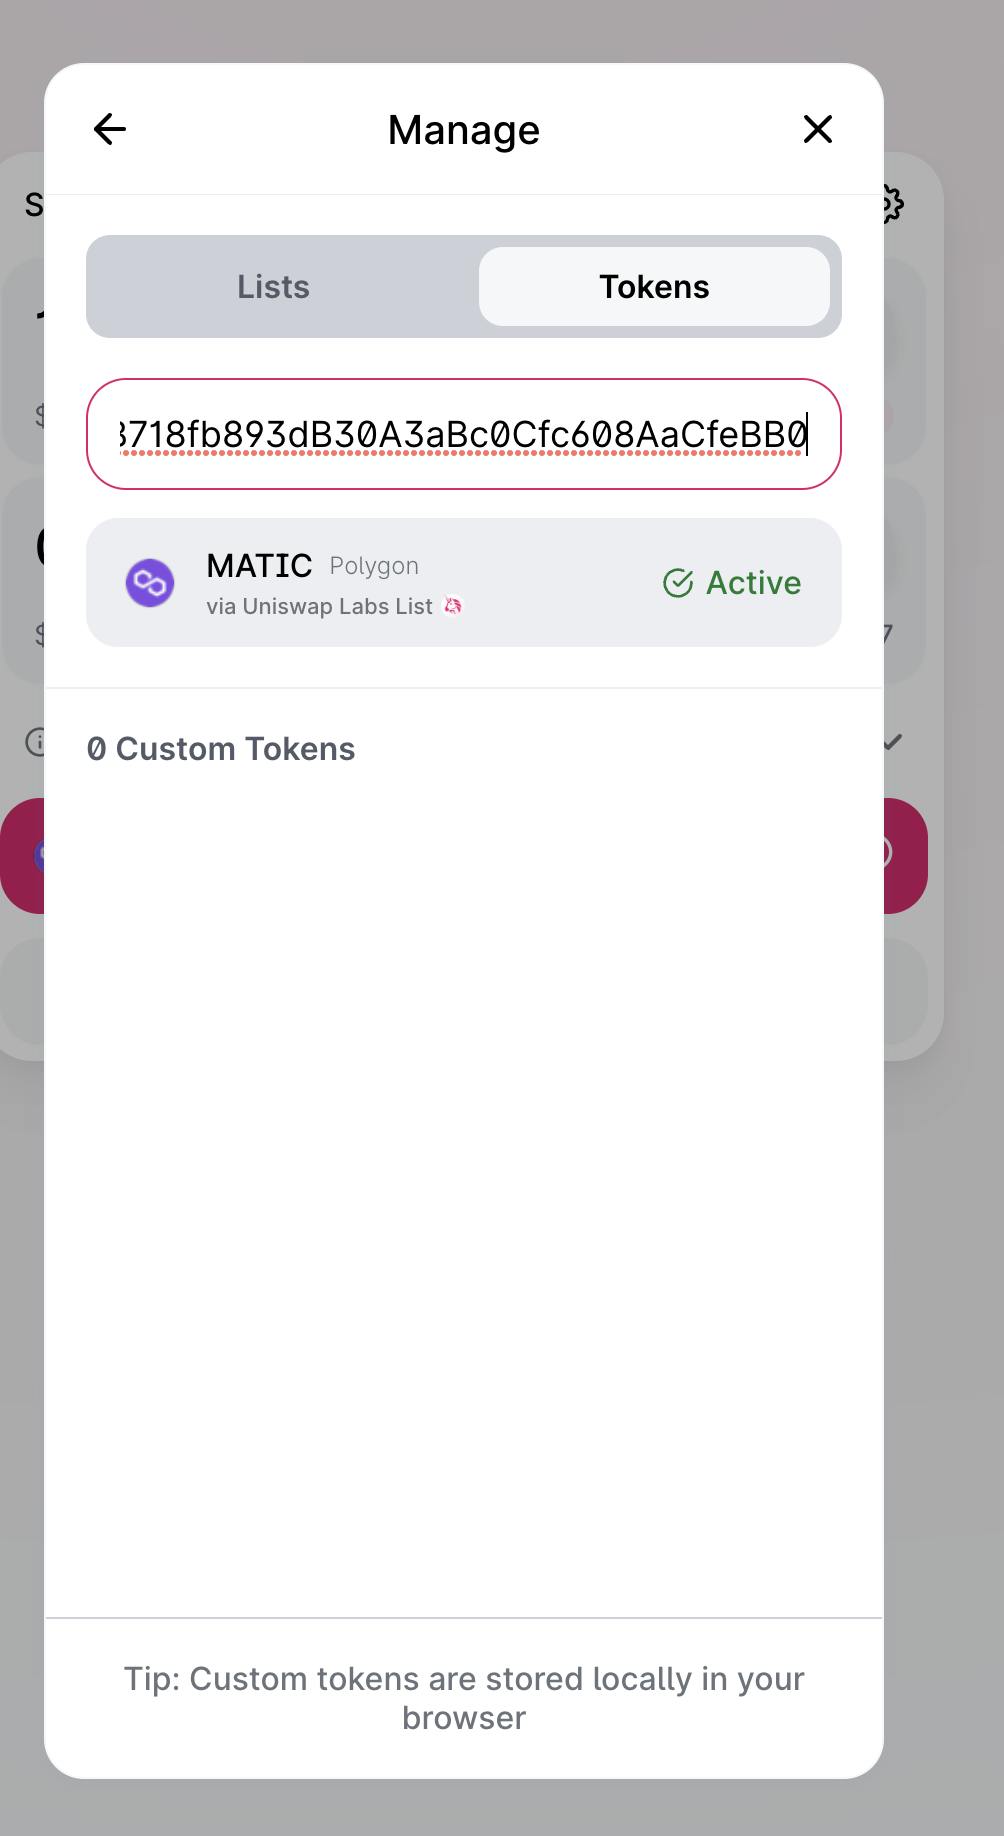 Matic showing as an approved token on Uniswap after inputting the address manually